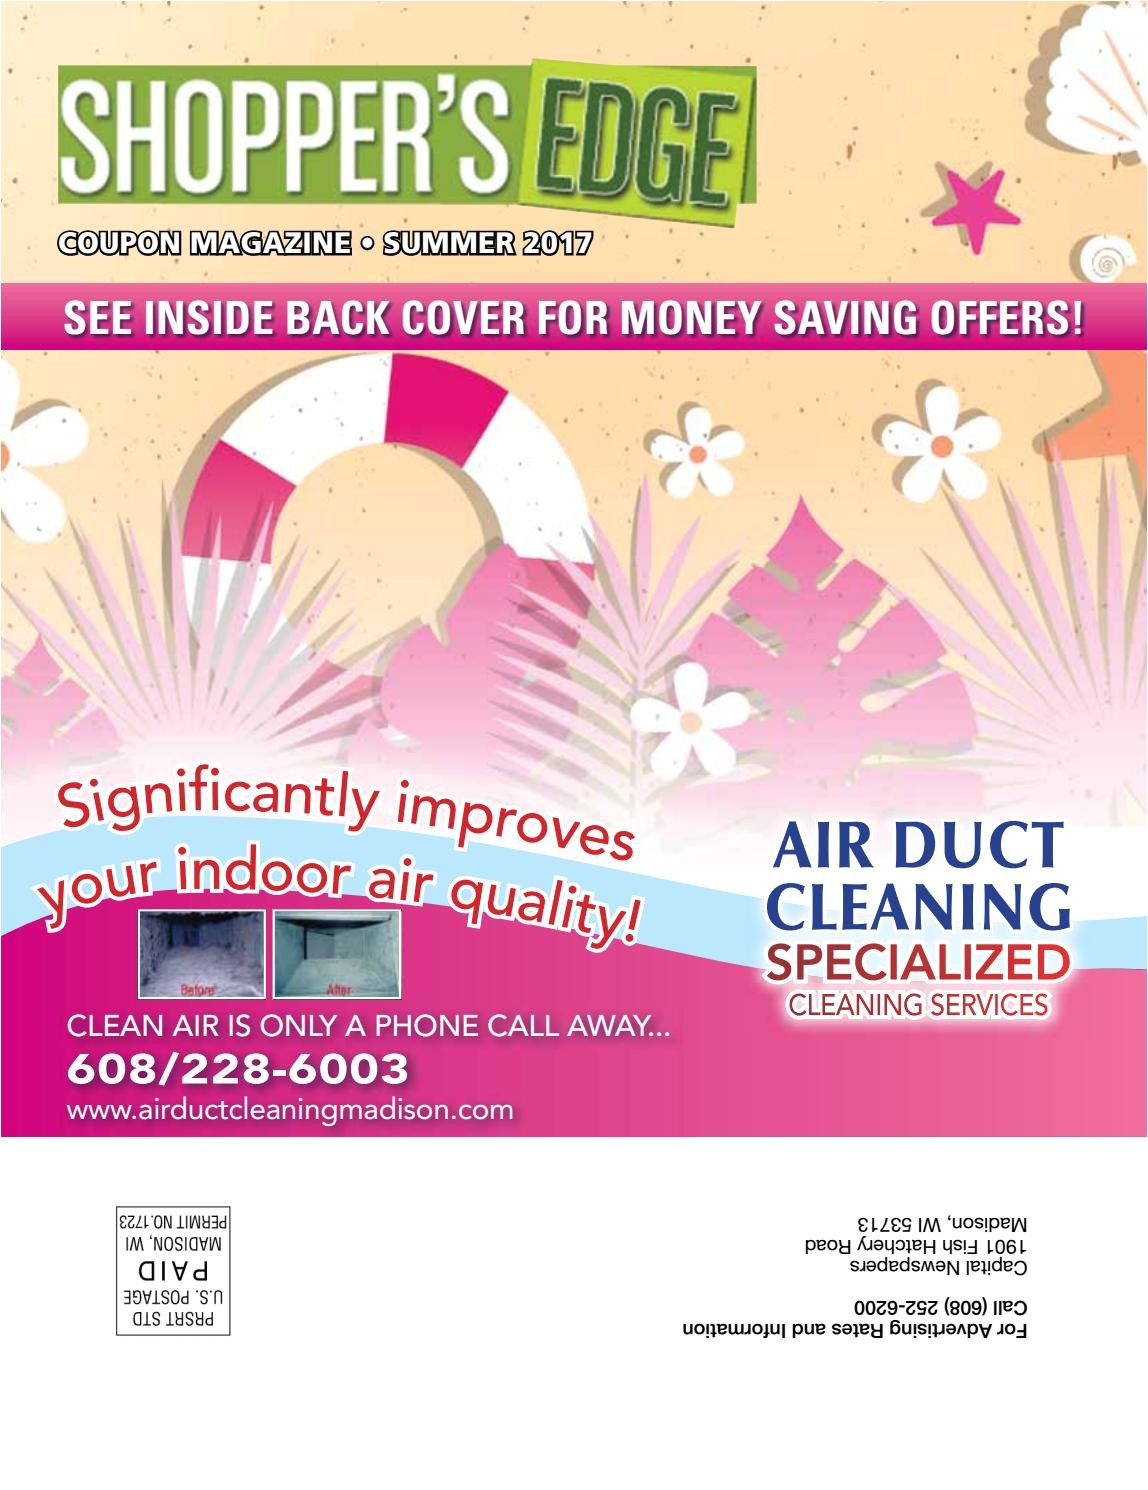 Dirty Duct Cleaning Madison Wi Shoppers Edge Summer 2017 by Madison Com issuu